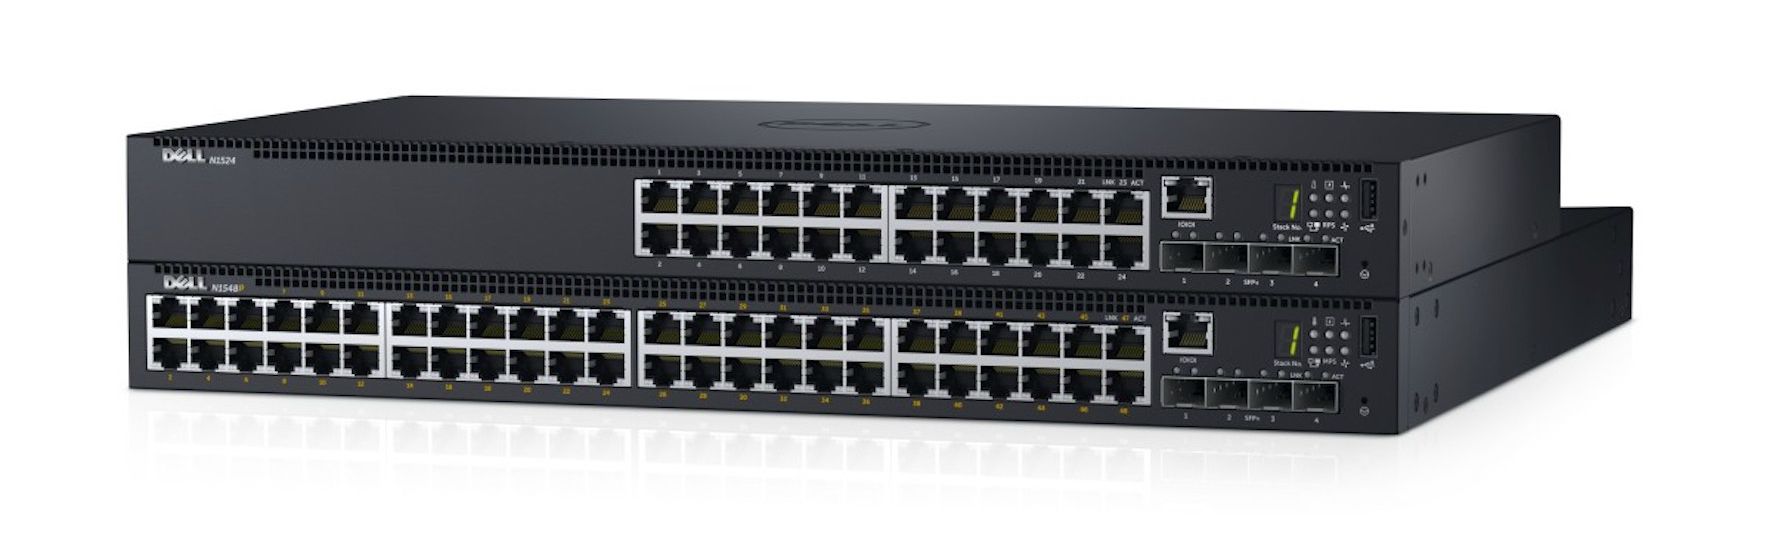 A Dell N1548P 48-Port PoE PowerSwitch